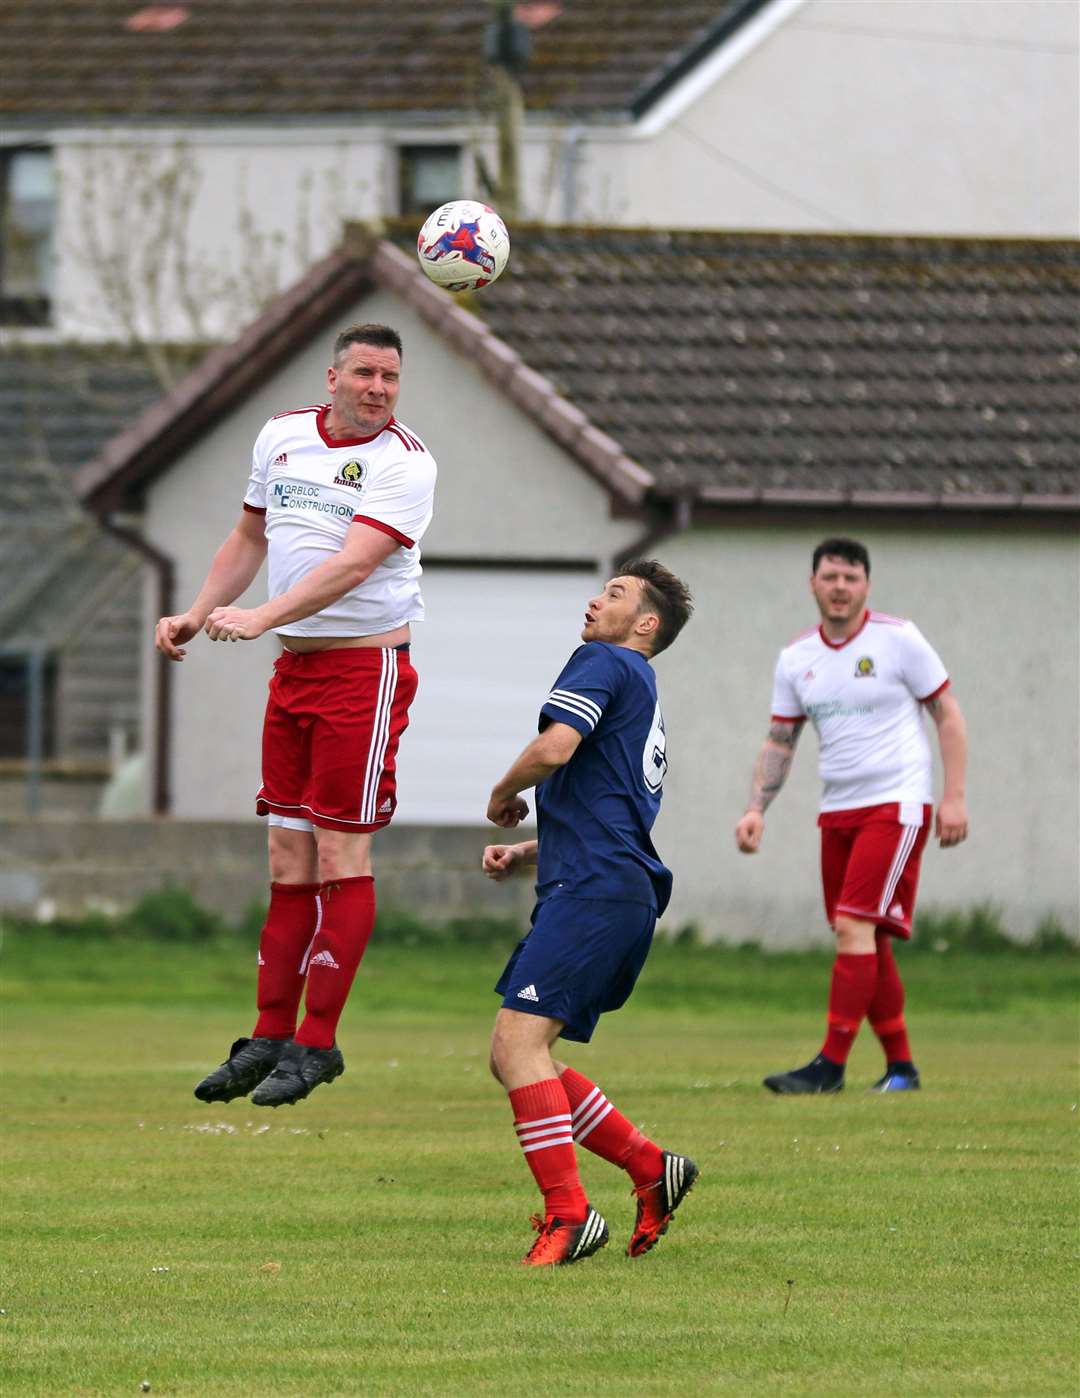 Halkirk's Michael Bremner heads clear during his side's 3-1 loss to Brora Wanderers. Picture: James Gunn